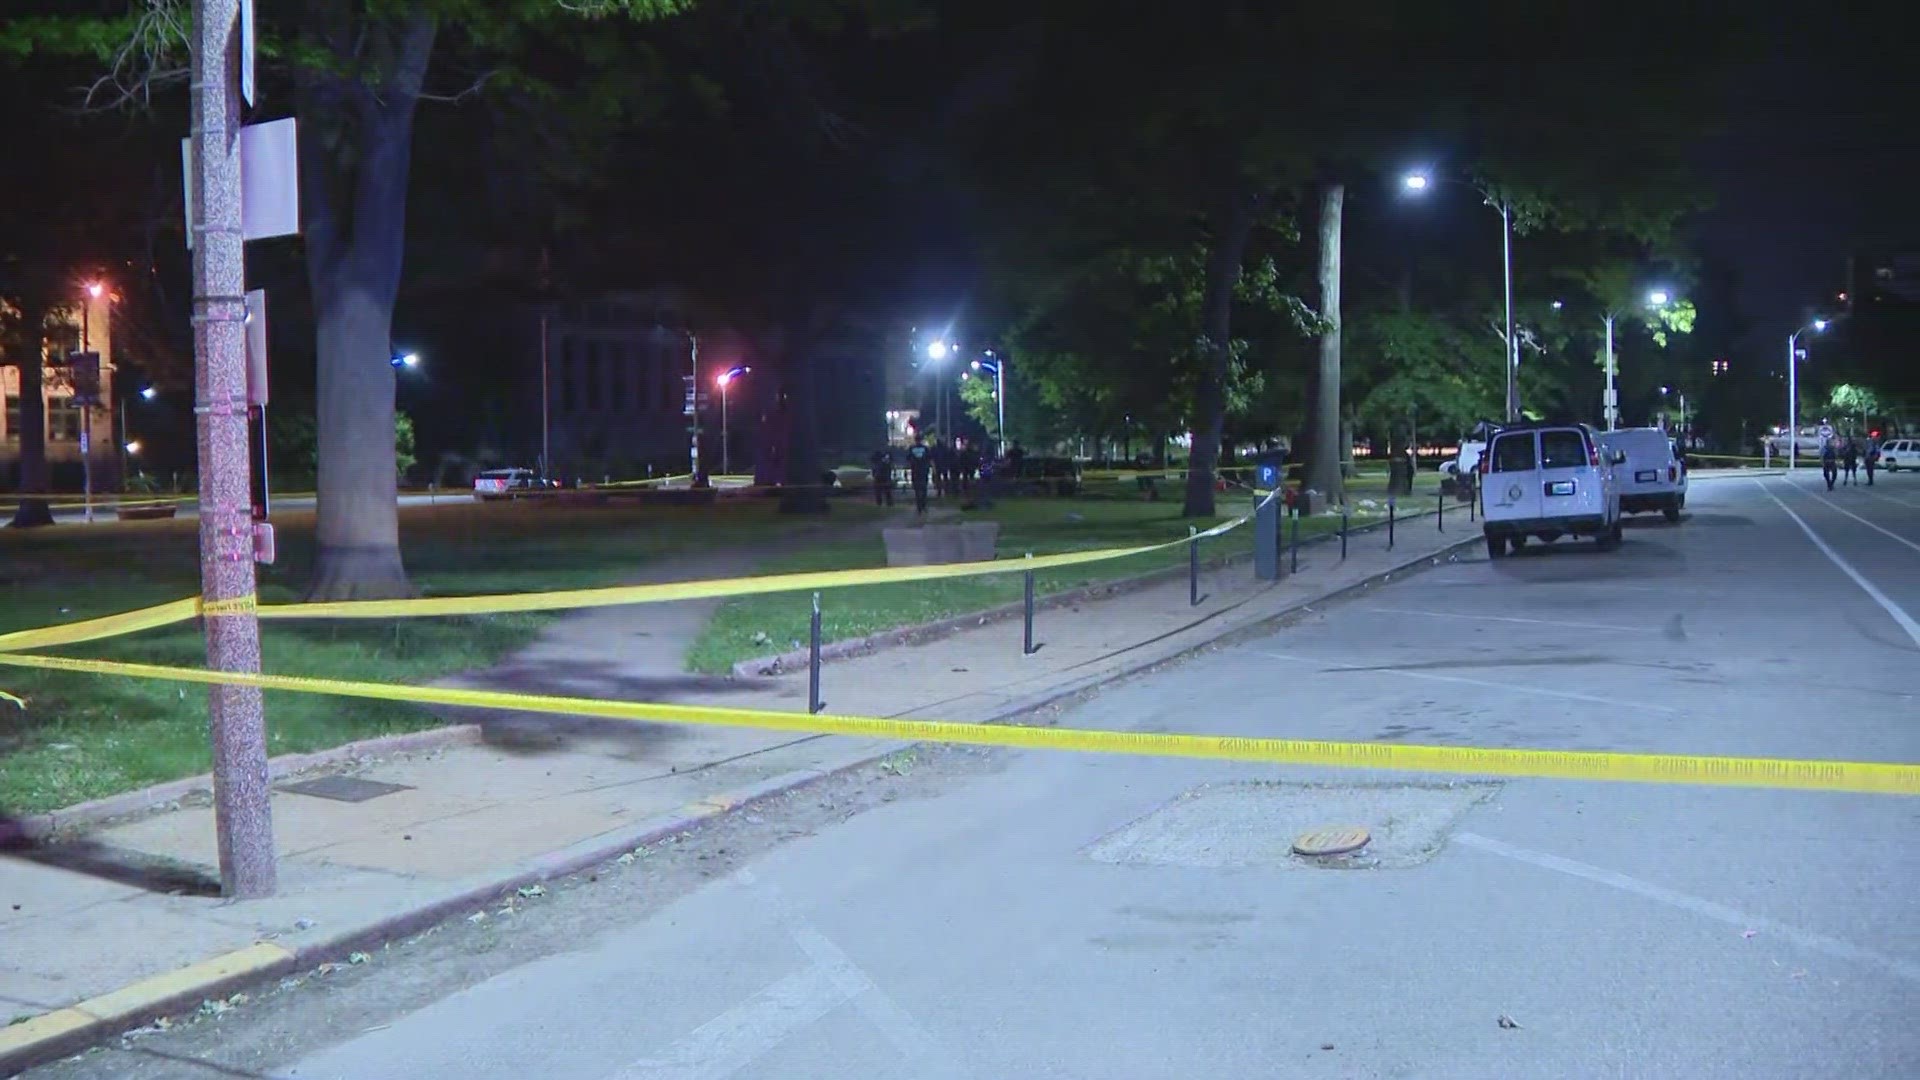 Man shot, unresponsive in downtown St. Louis Thursday night. Responding officers found a man shot and unresponsive.